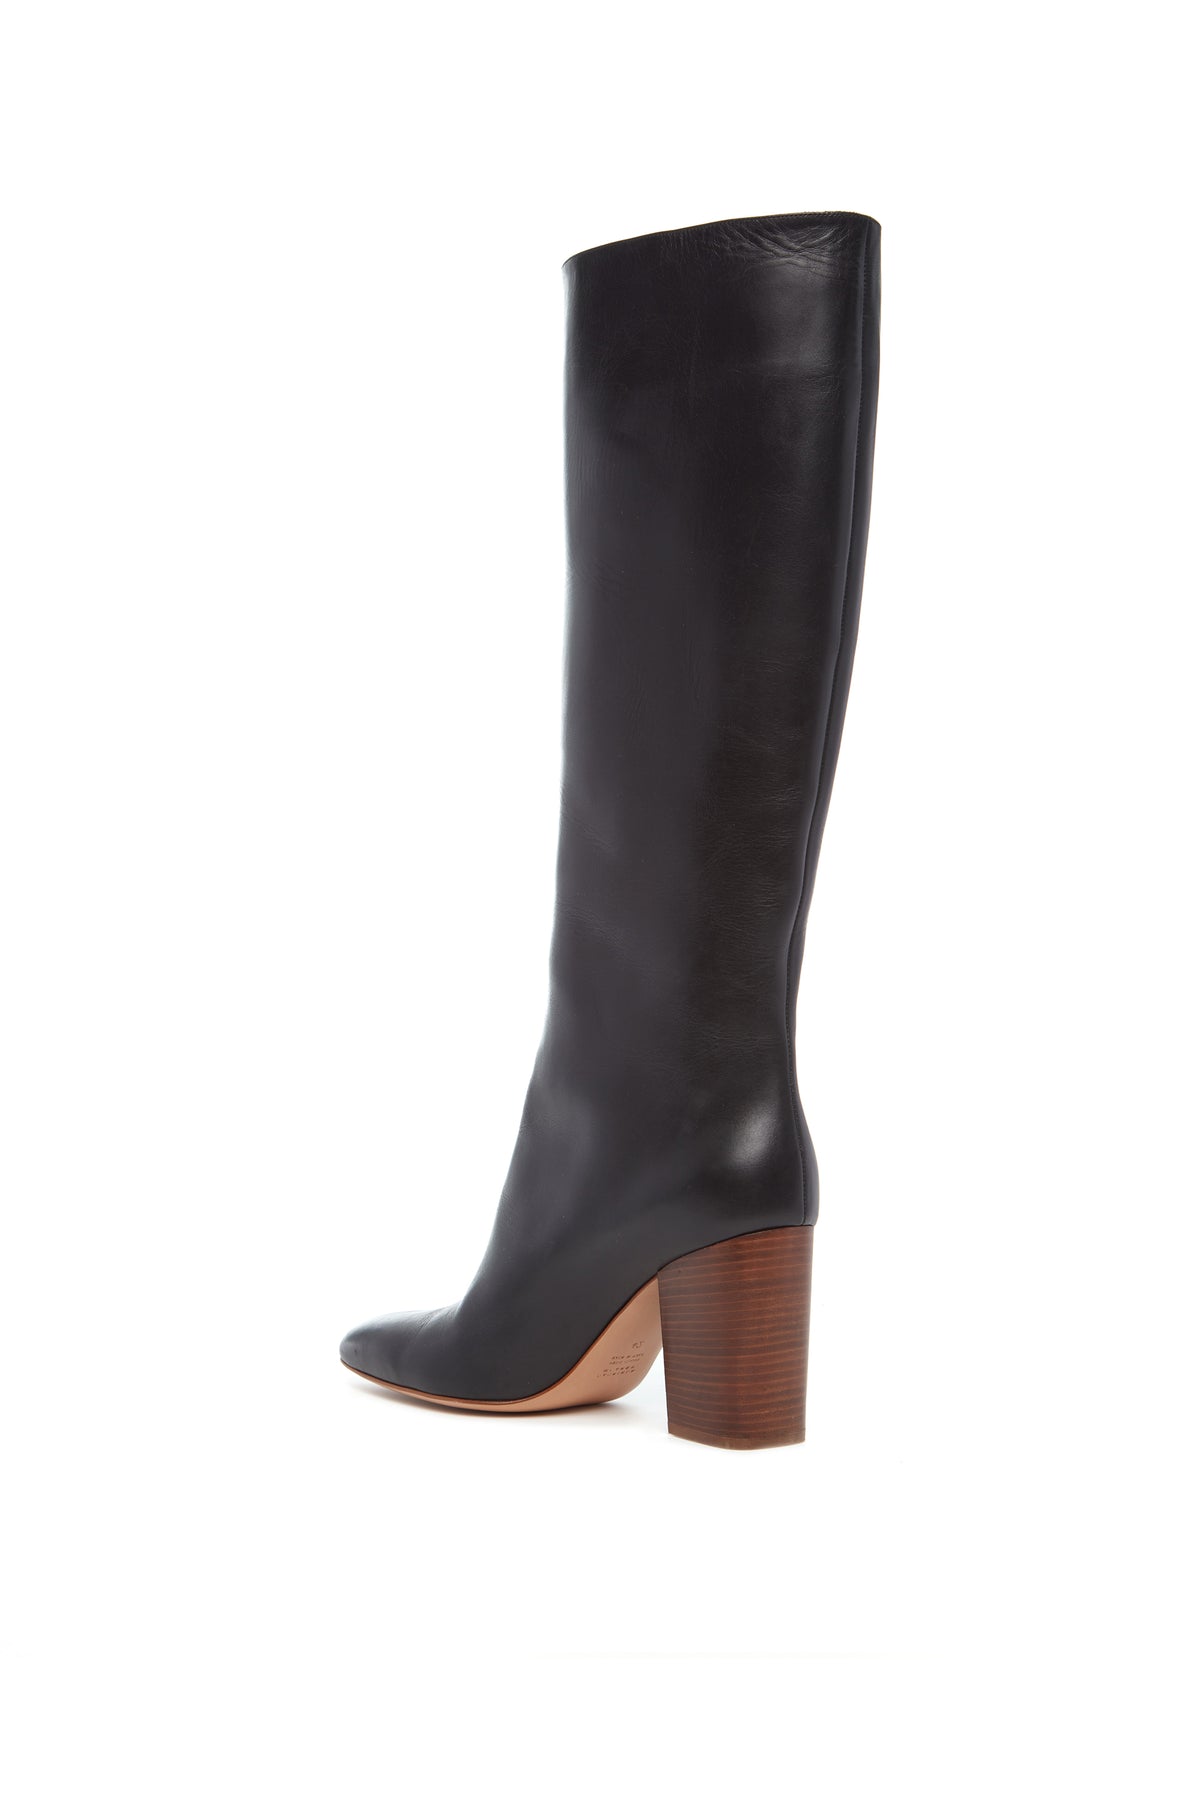 Sascha Knee High Boot in Black Leather